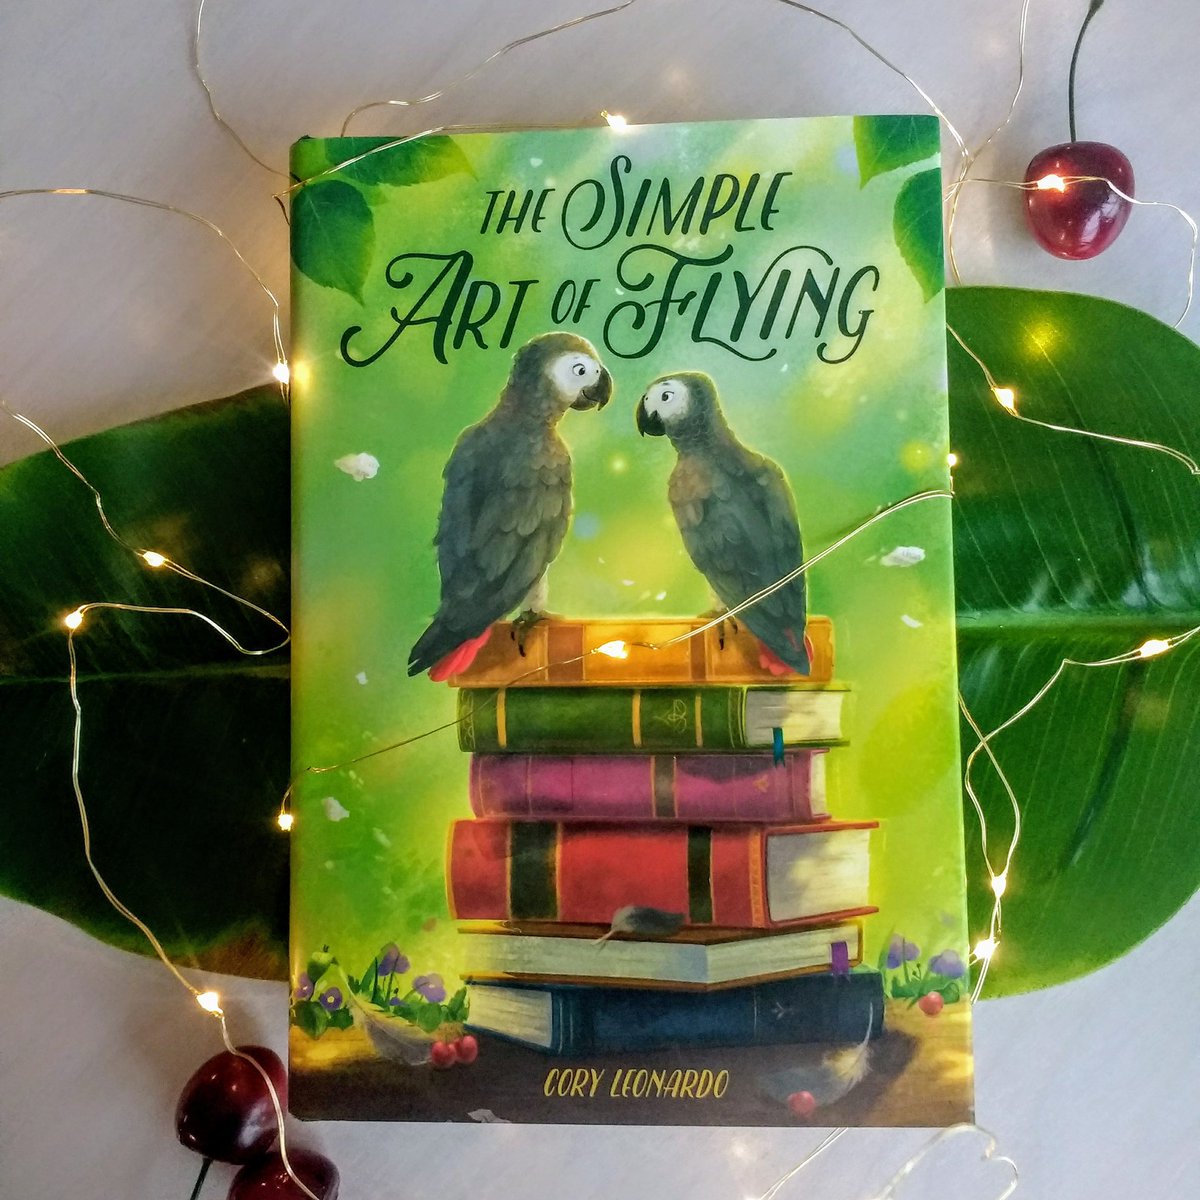 On #WorldPoetryDay, I'm celebrating 5 yrs of Norton-Anthology-eating Alastair! Wonder what the greats sound like when a snarky parrot spits their poems back up? Find out in this 5 winner GIVEAWAY F/RT to enter. Teachers get double entries, just comment below! Ends 3/28. US only